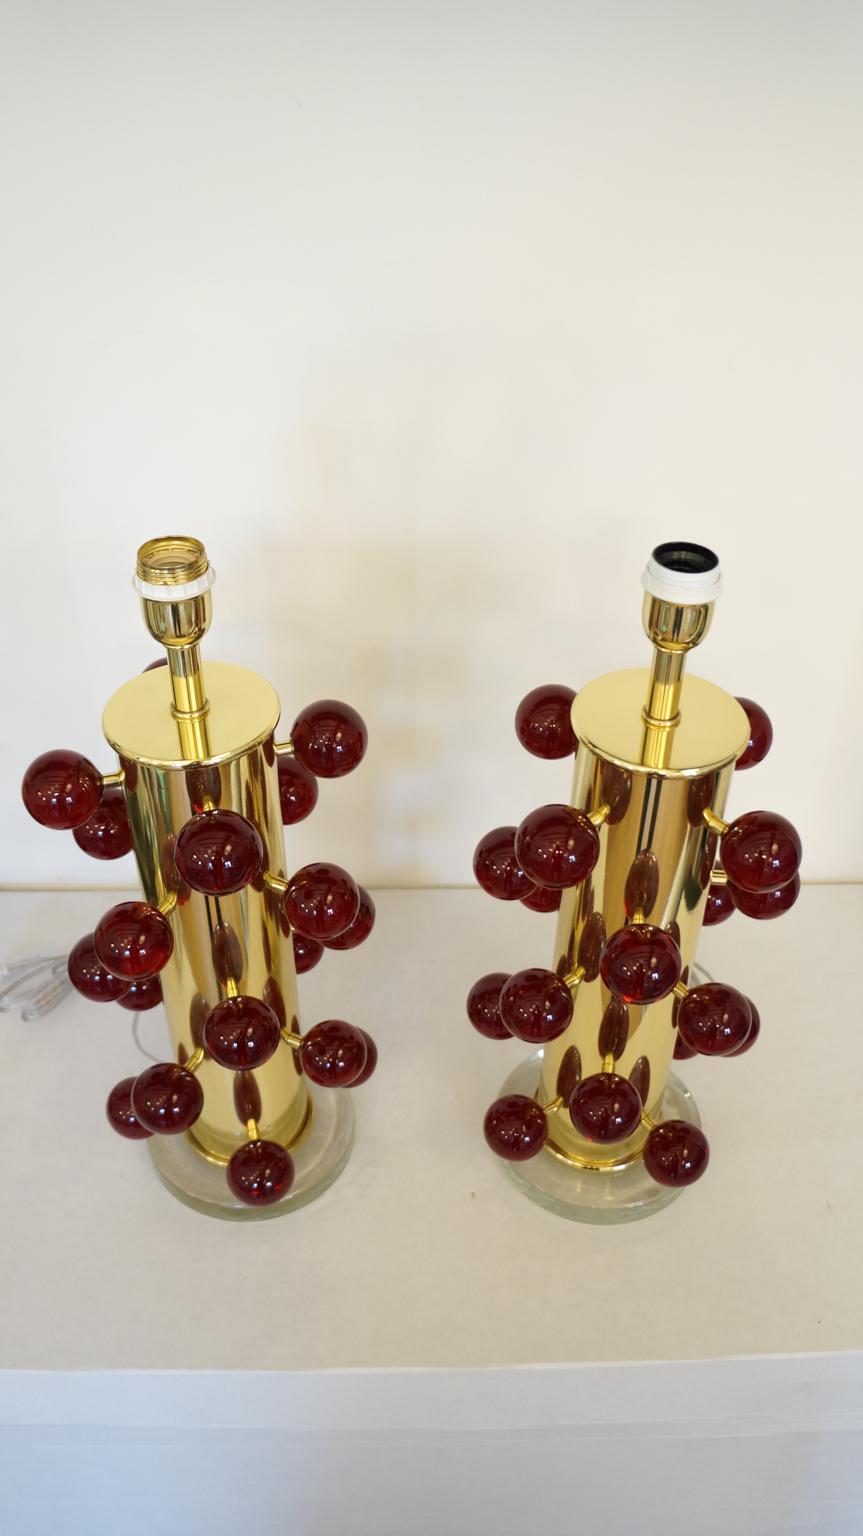 Exclusive pair of Murano glass table lamps with Pulegoso red spheres, transparent crystal base and gold chromed frame. 
Pulegoso processing are bubbles inside the color.
Lamp made with great care and precision by our master glassmaker Alberto Donà